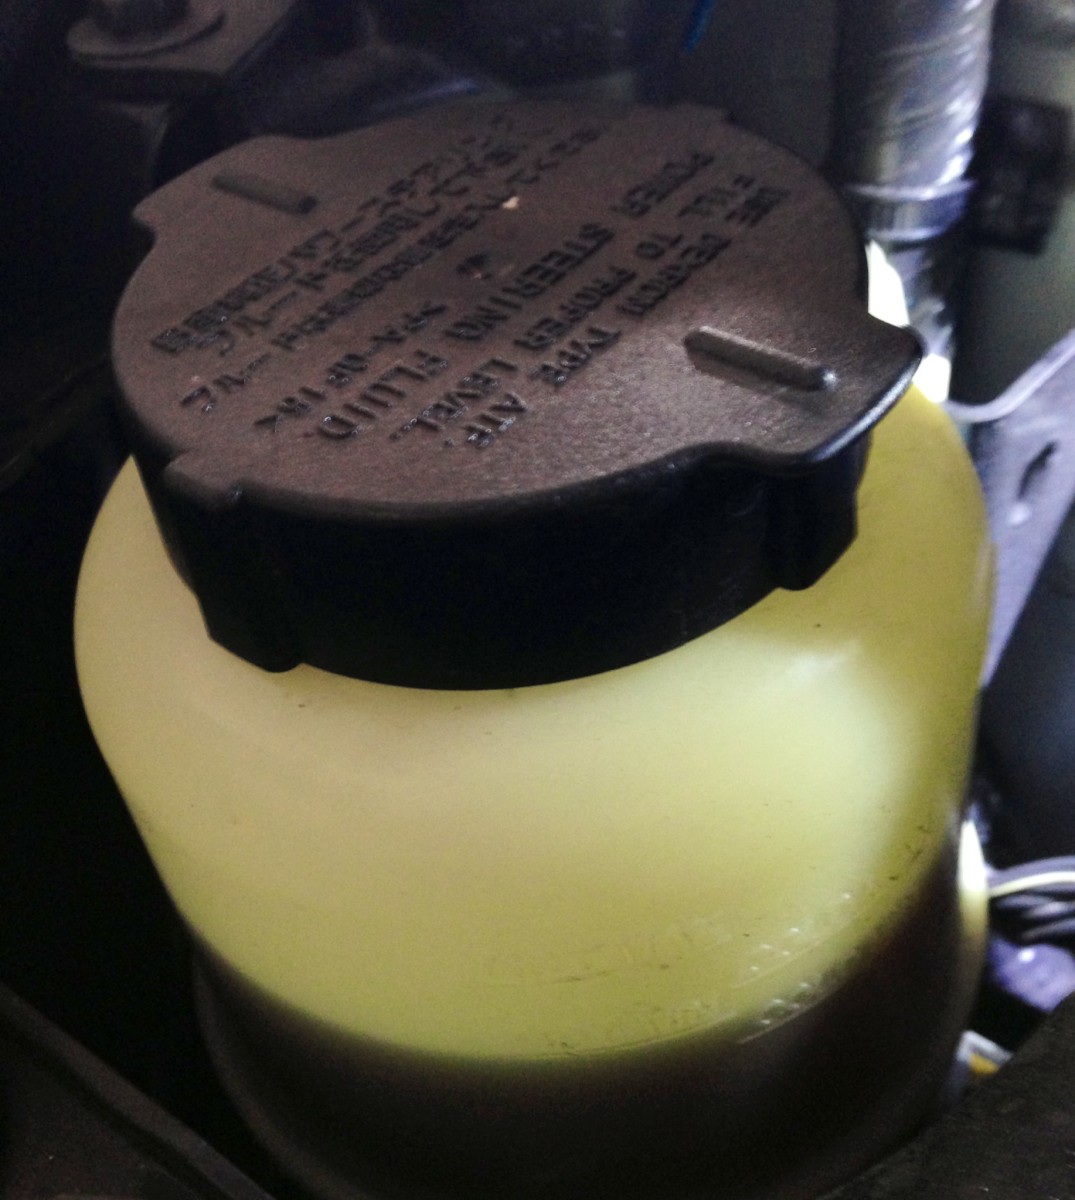 This power steering fluid reservoir has marks for both "LOW" and "MAX" at both "cold" and "hot" engine temperatures.  Fluid can expand with heat, read the indicating marks on your car carefully.